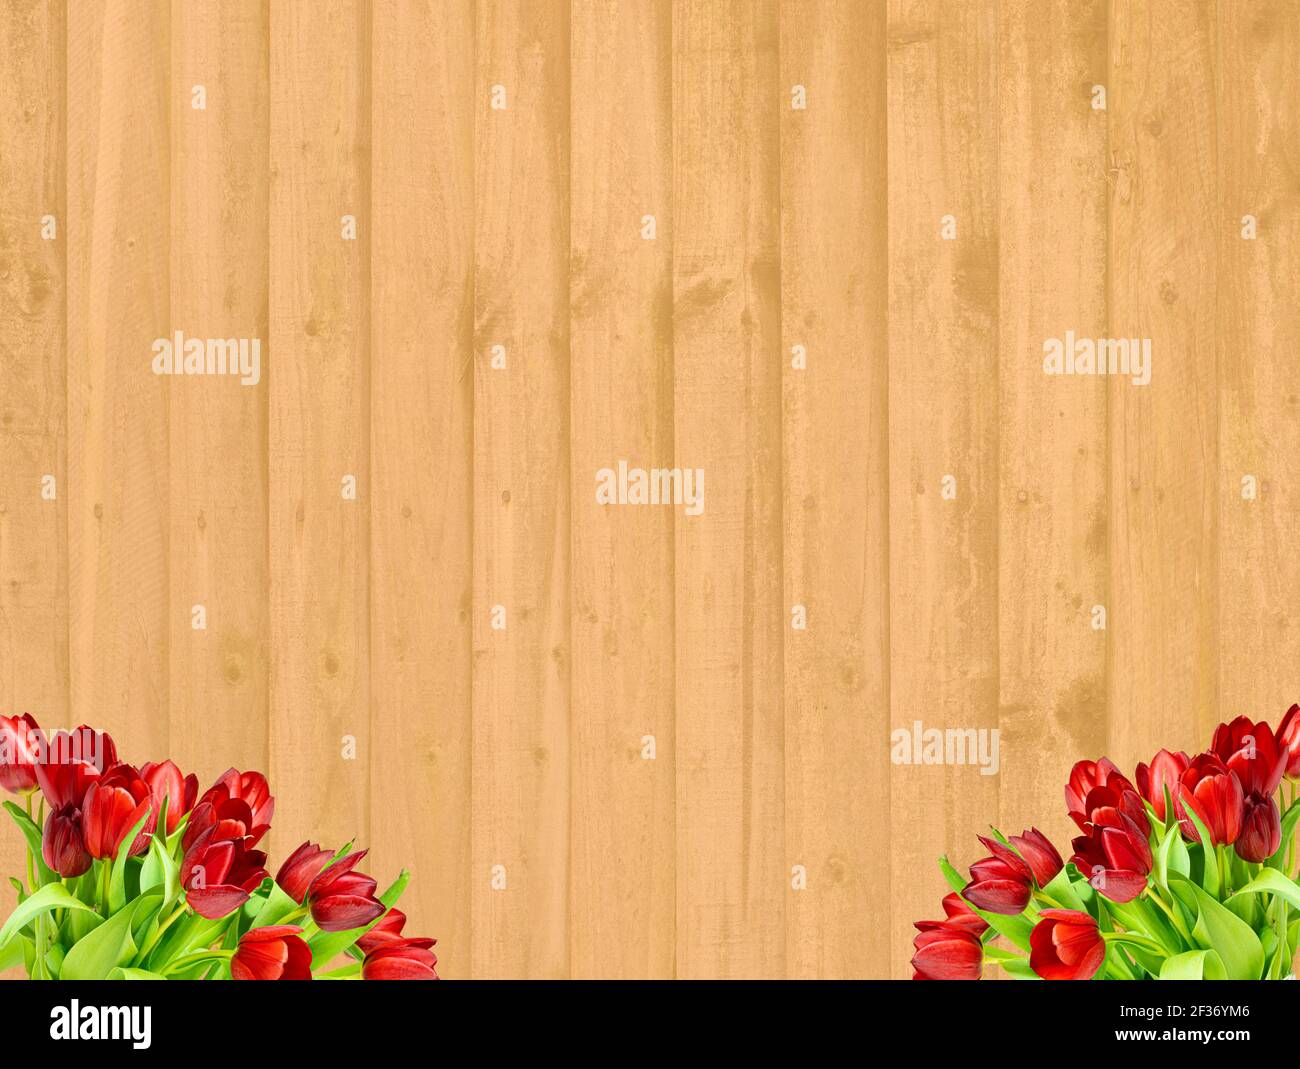 Bunches of red tulips on a backdrop of golden wooden planks, use as a cheerful or romantic background Stock Photo